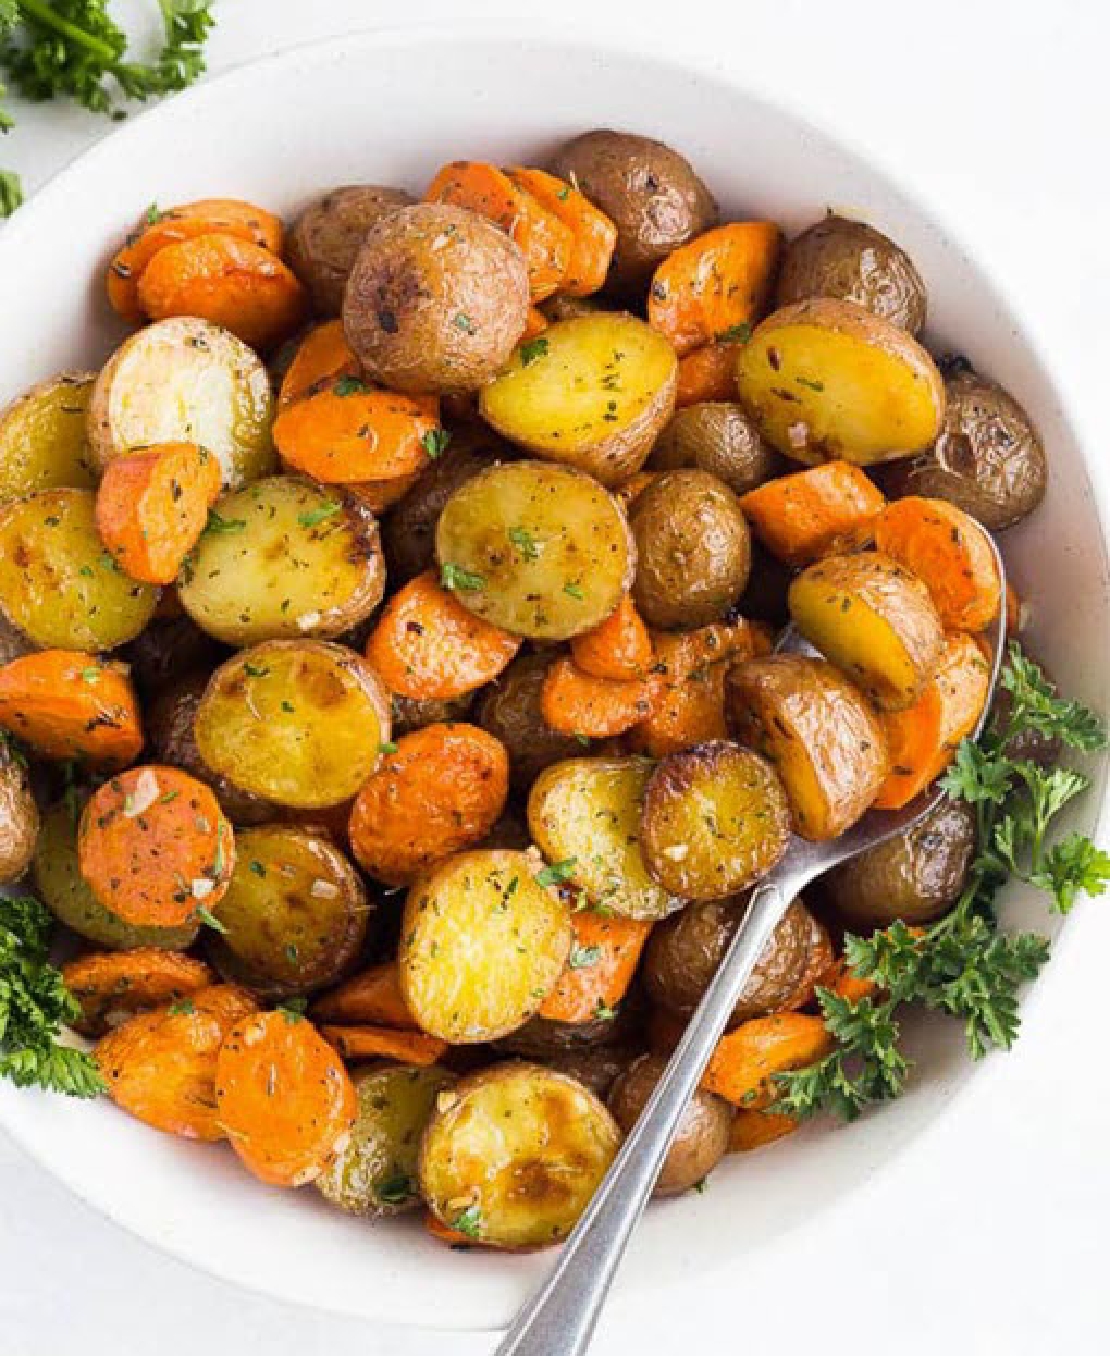 Garlic Butter Roasted Potatoes and Carrots